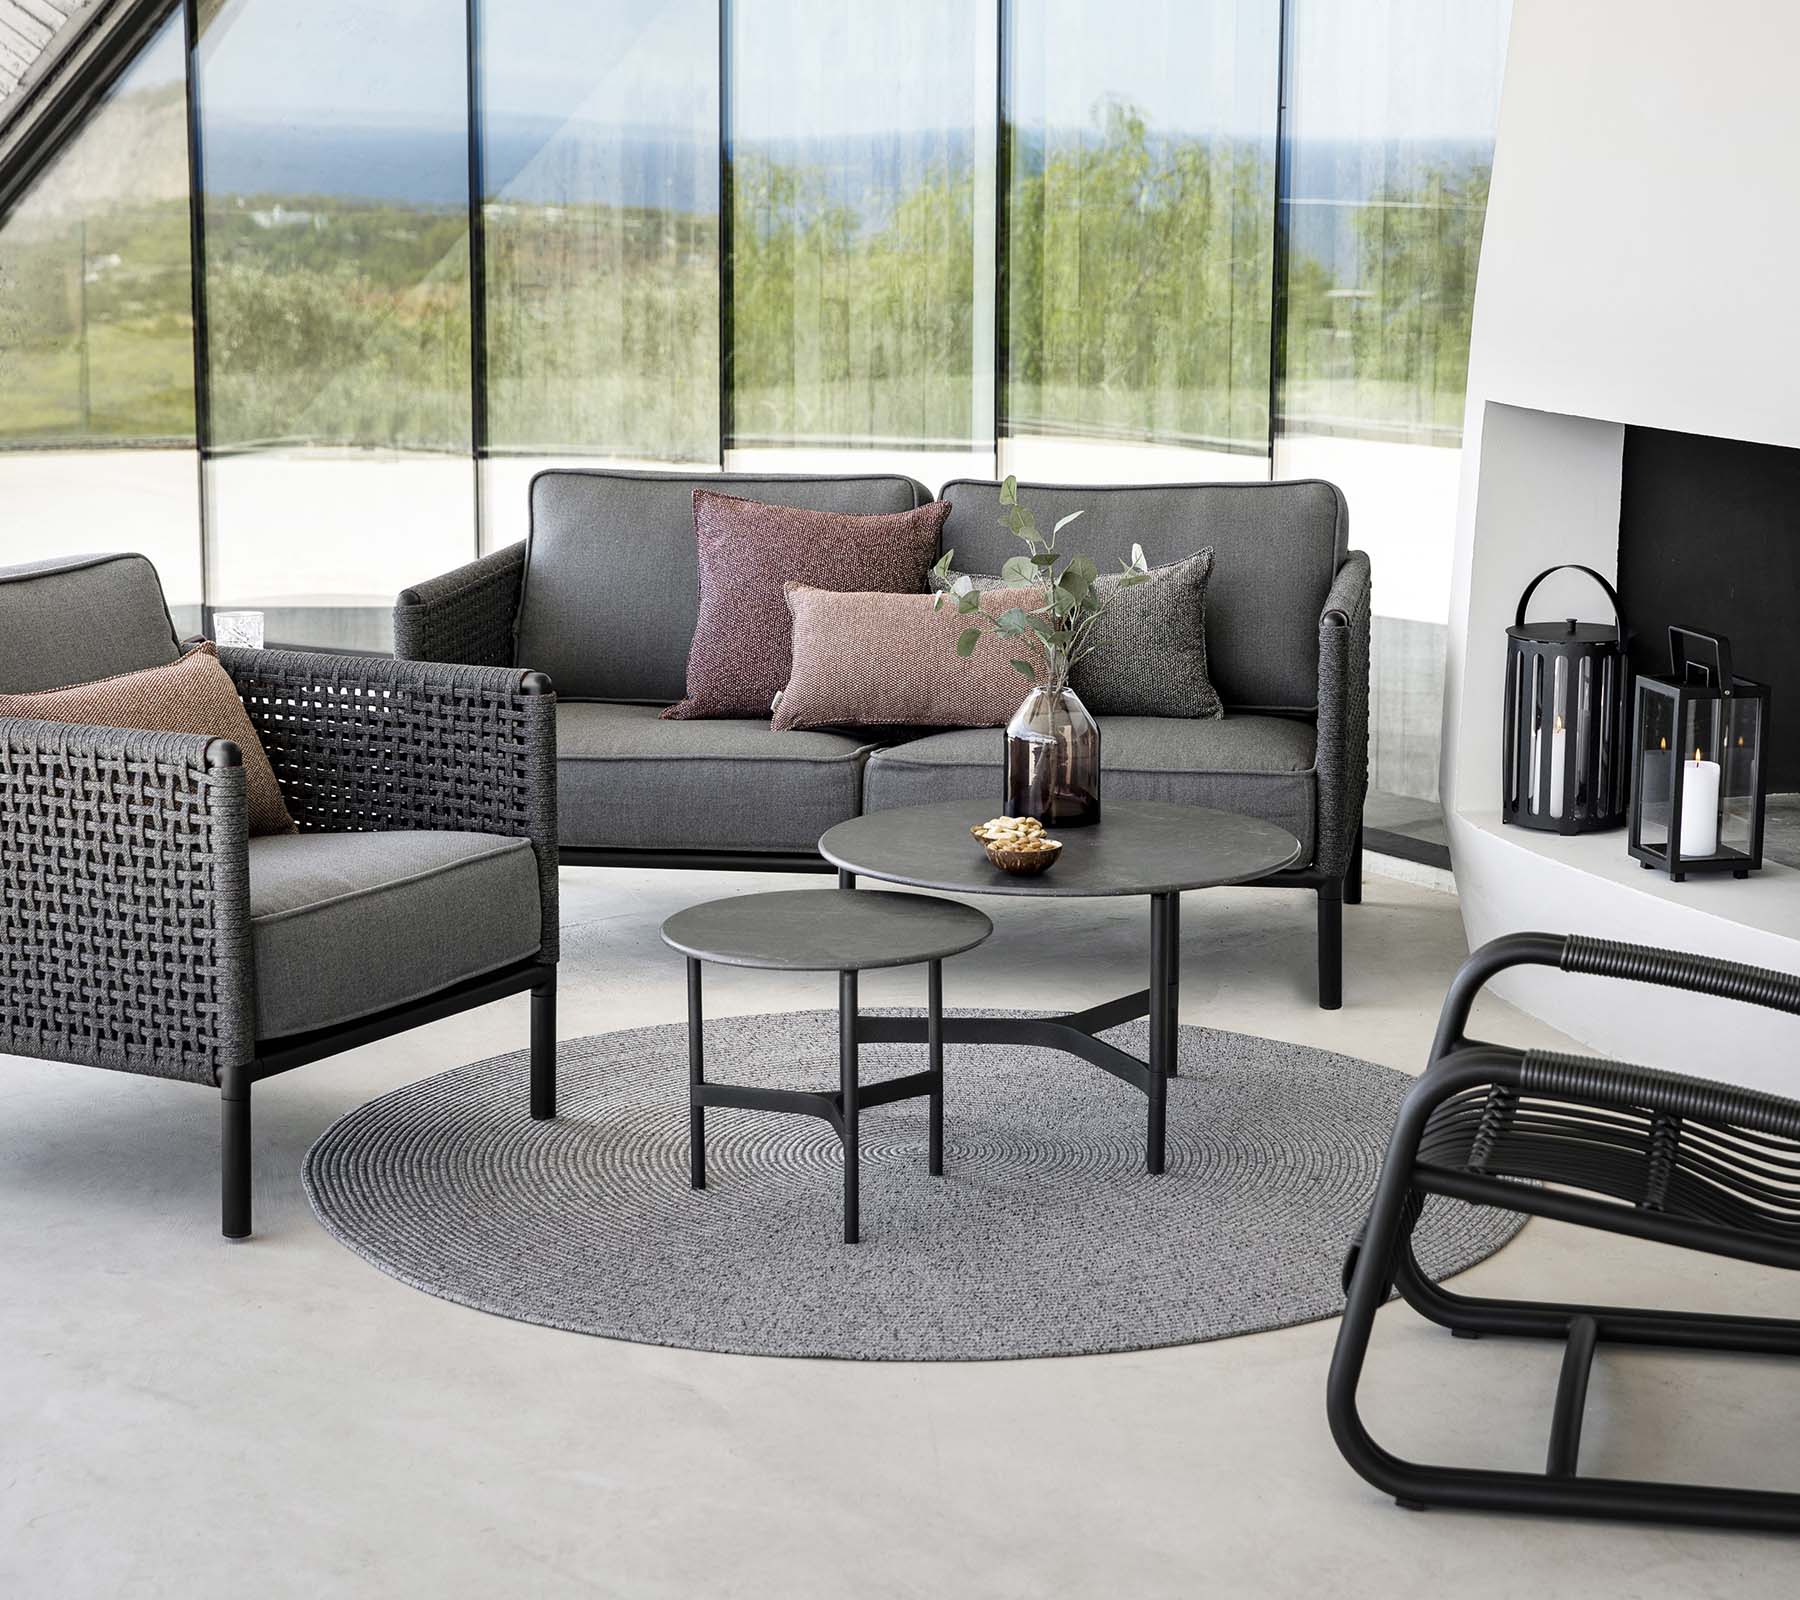 Boxhill's Circle Outdoor Rug Grey lifestyle image with 2 seater sofa and club chair